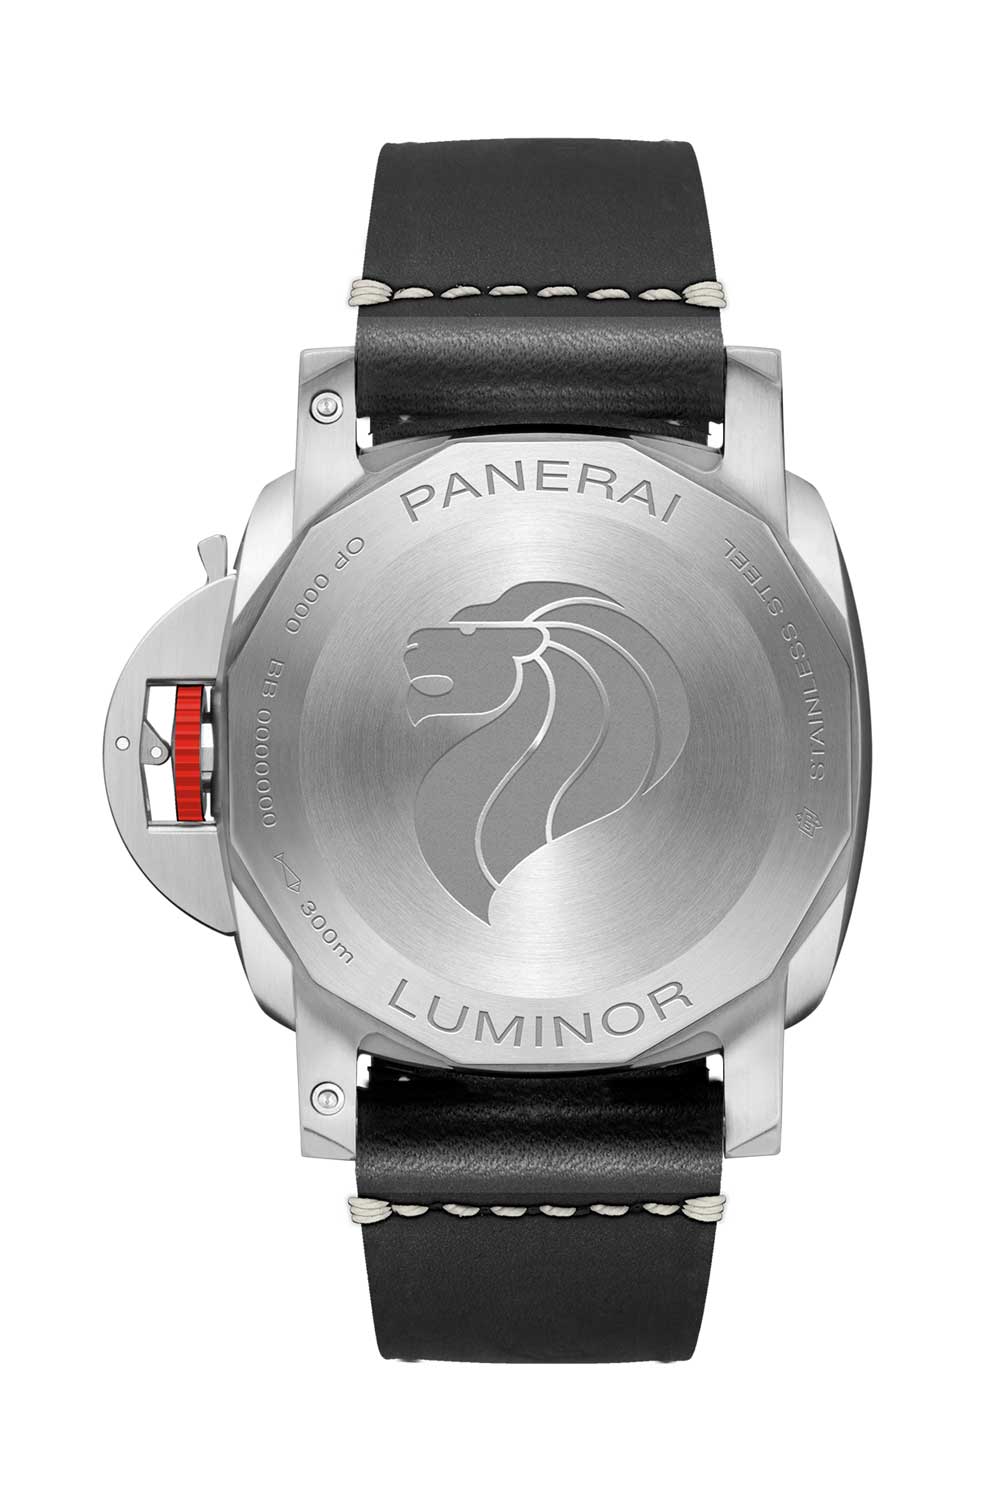 The Panerai Luminor GMT ION Special Edition – 44mm (PAM01177)